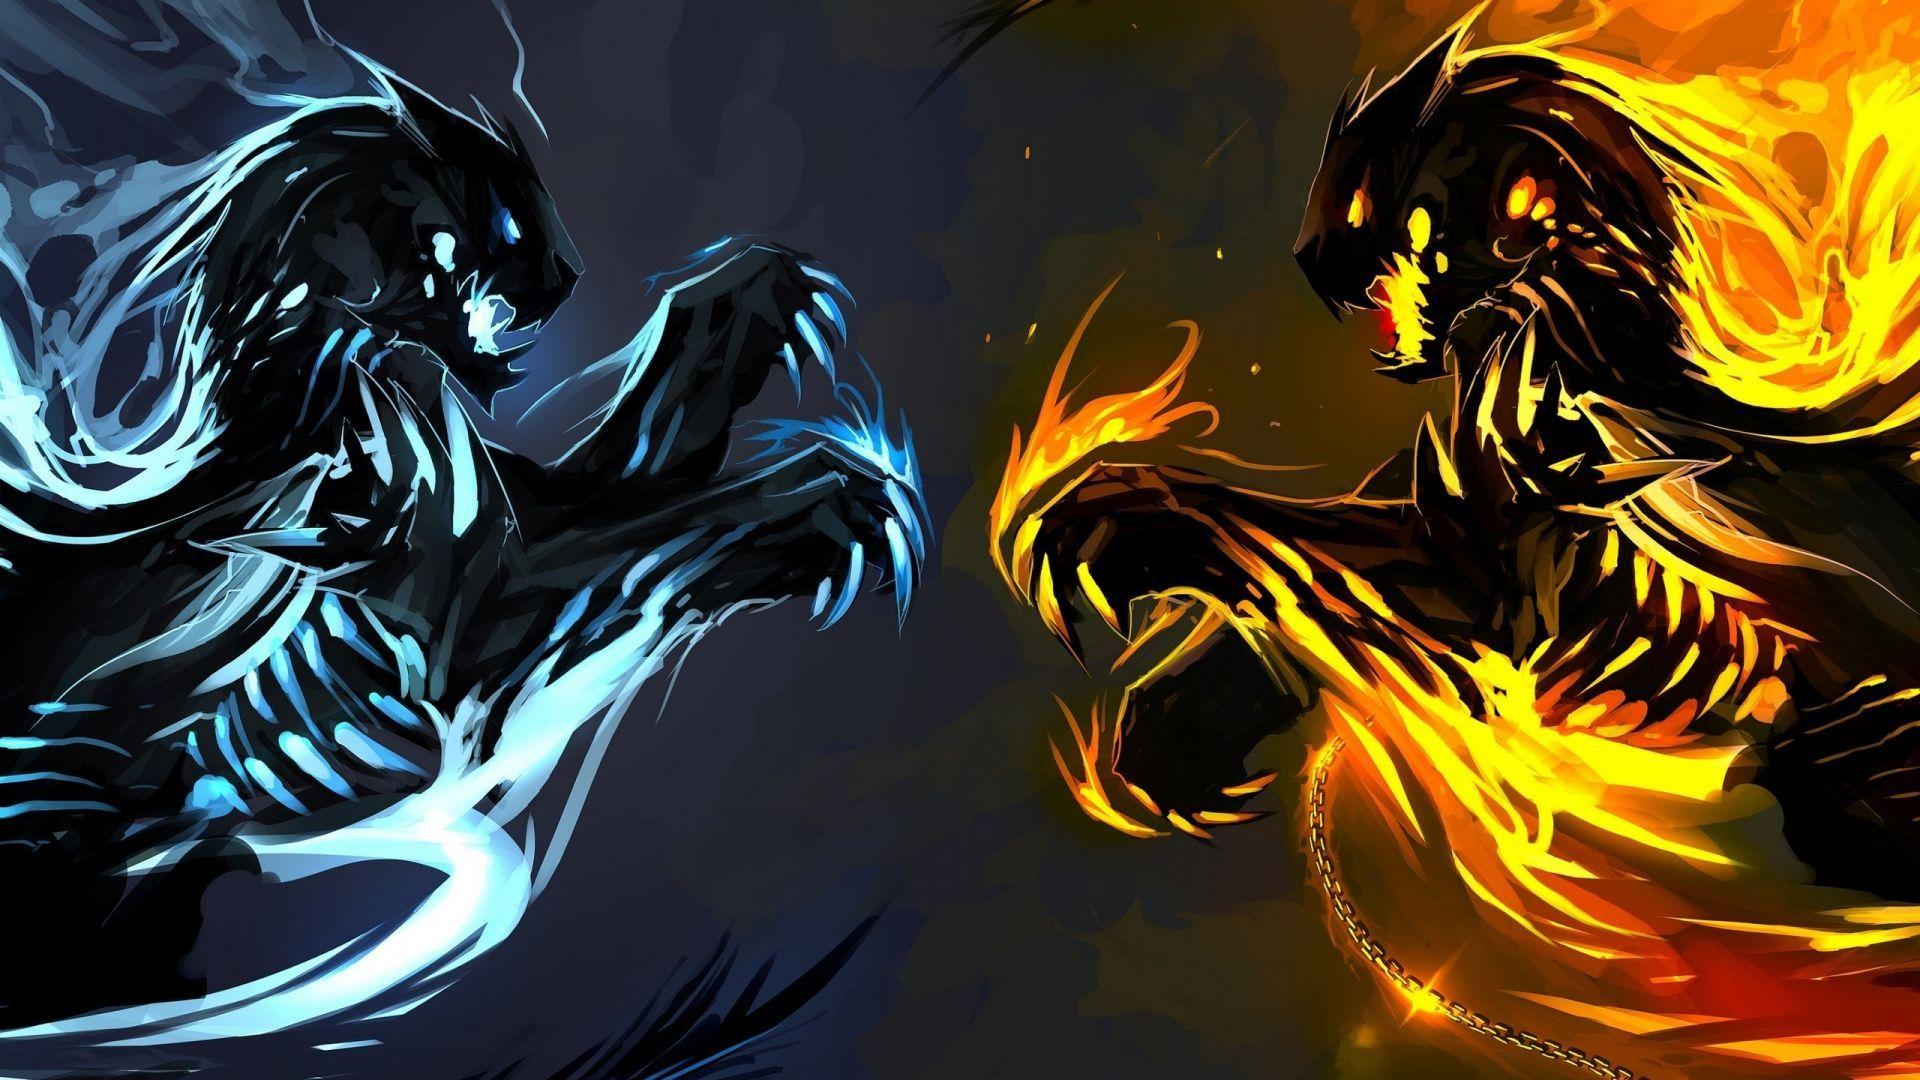 Ice and Fire Dragons wallpaper 2560x1440. Fire and ice dragons, Ice dragon, Fire and ice wallpaper